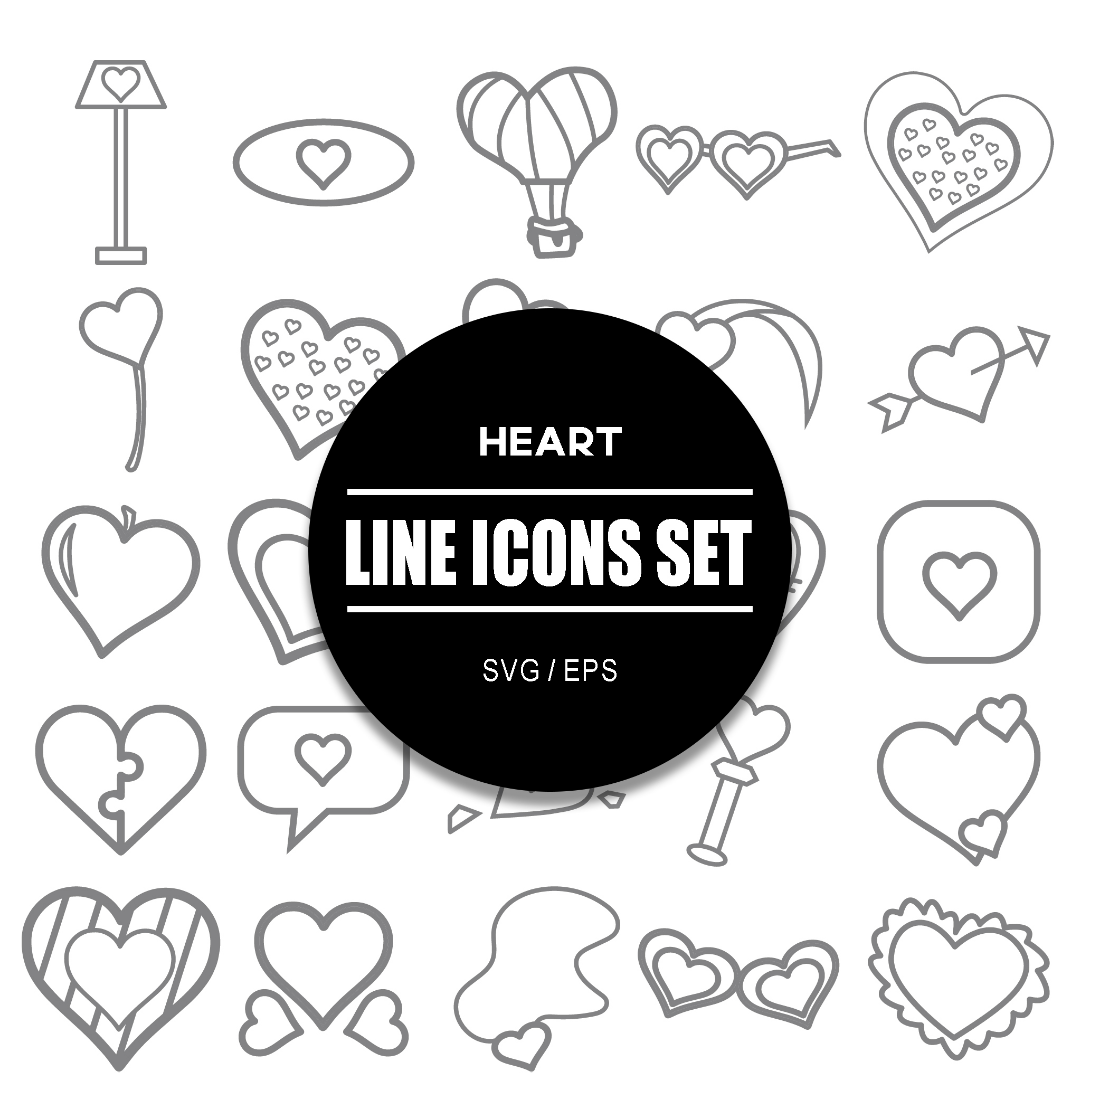 Heart Icon Set cover image.